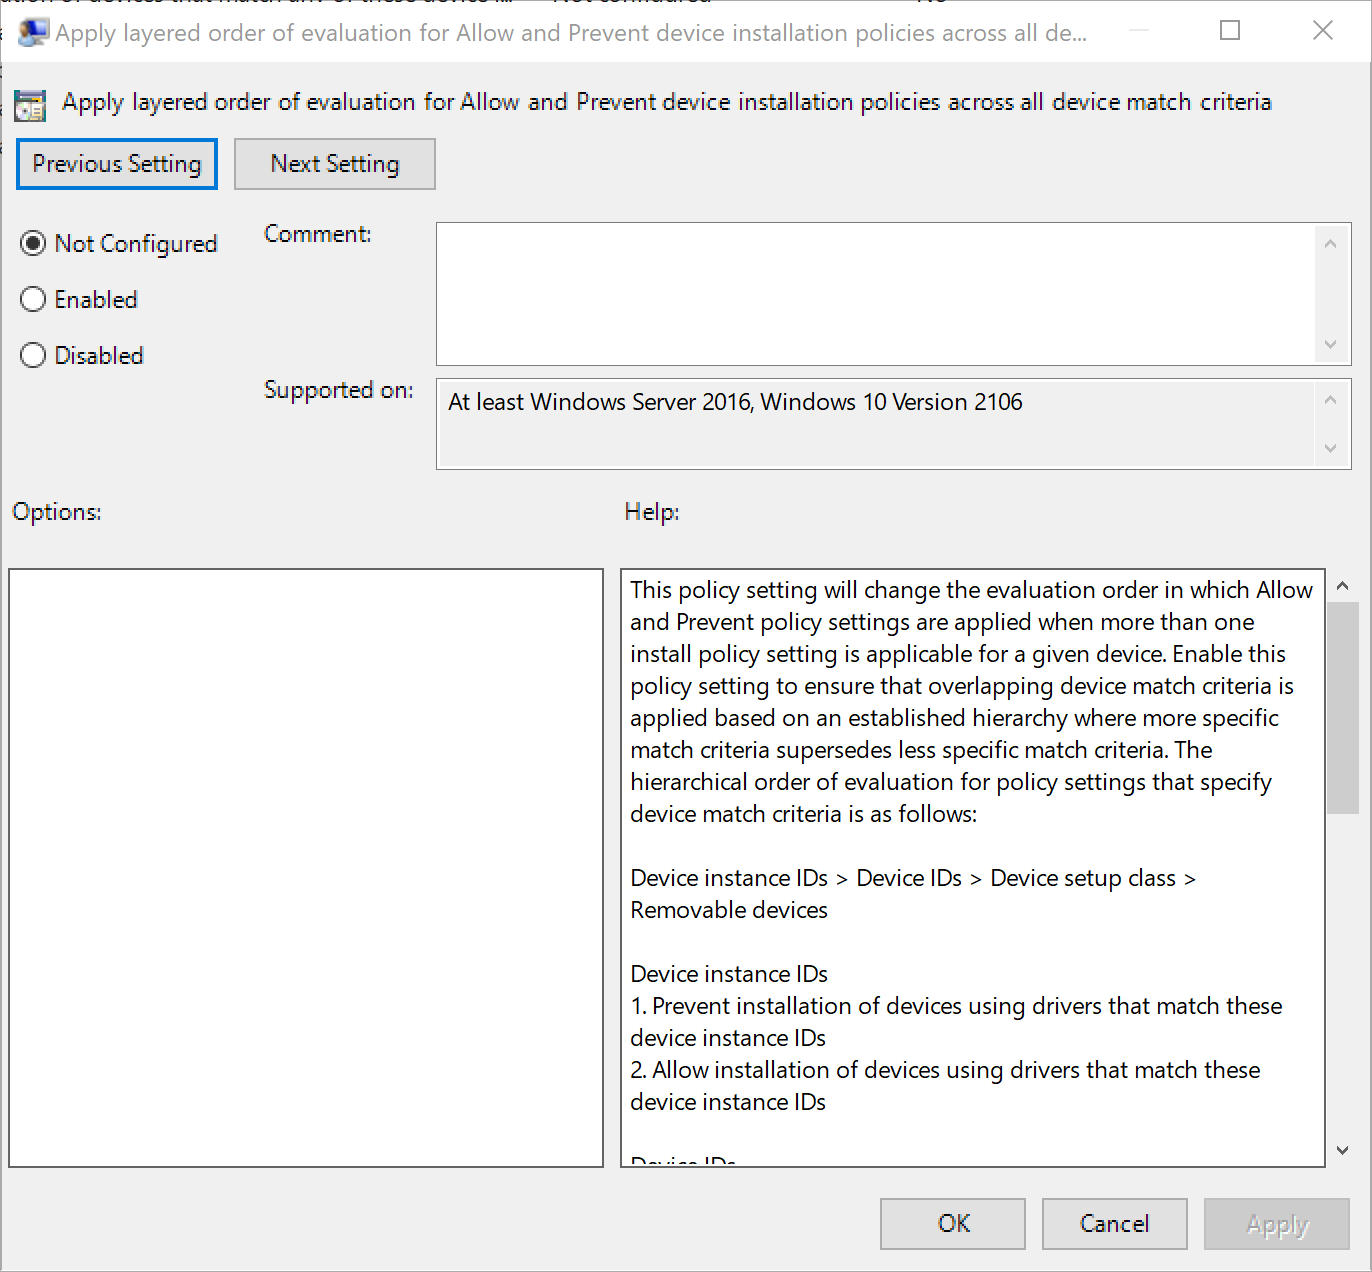 Specify the appropriate domain controller and user/computer account to simulate the Group Policy results for.
Follow the wizard steps to generate the Group Policy results report.